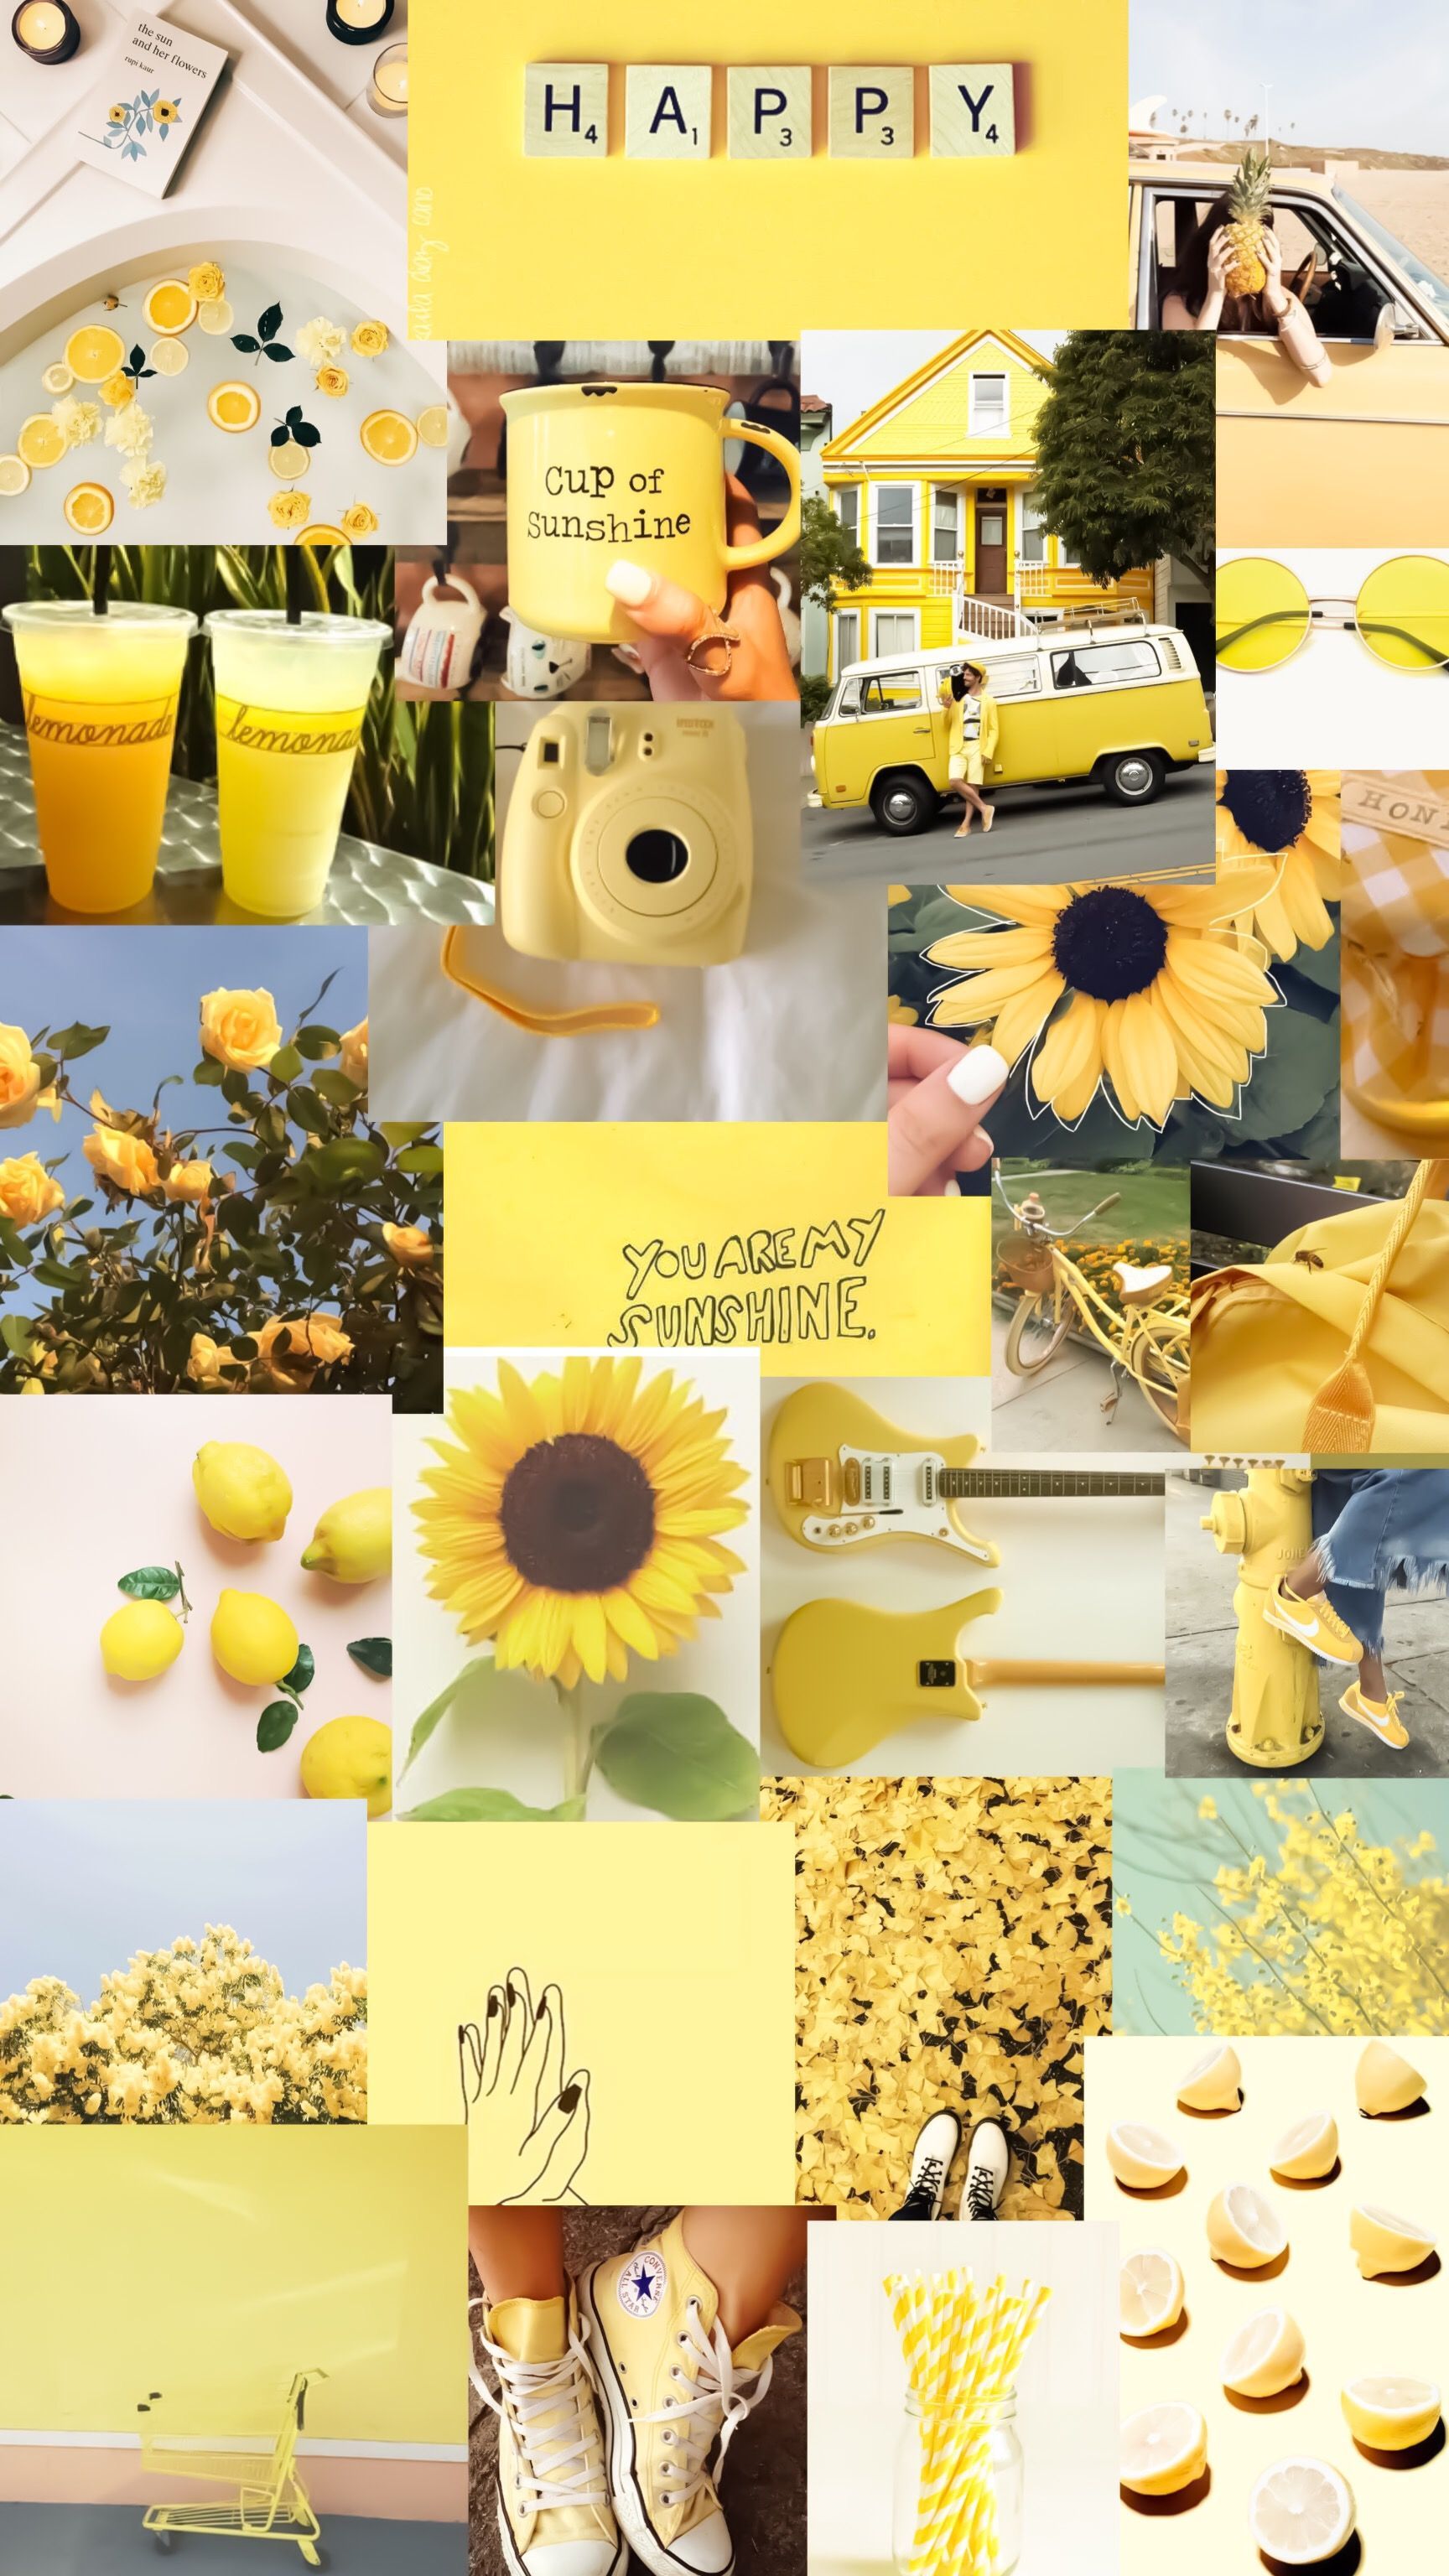 Pin By Nurfareha Fithri On Collage Wallpaper. IPhone Wallpaper Tumblr Aesthetic, IPhone Wallpaper Yellow, Aesthetic Iphone Wallpaper